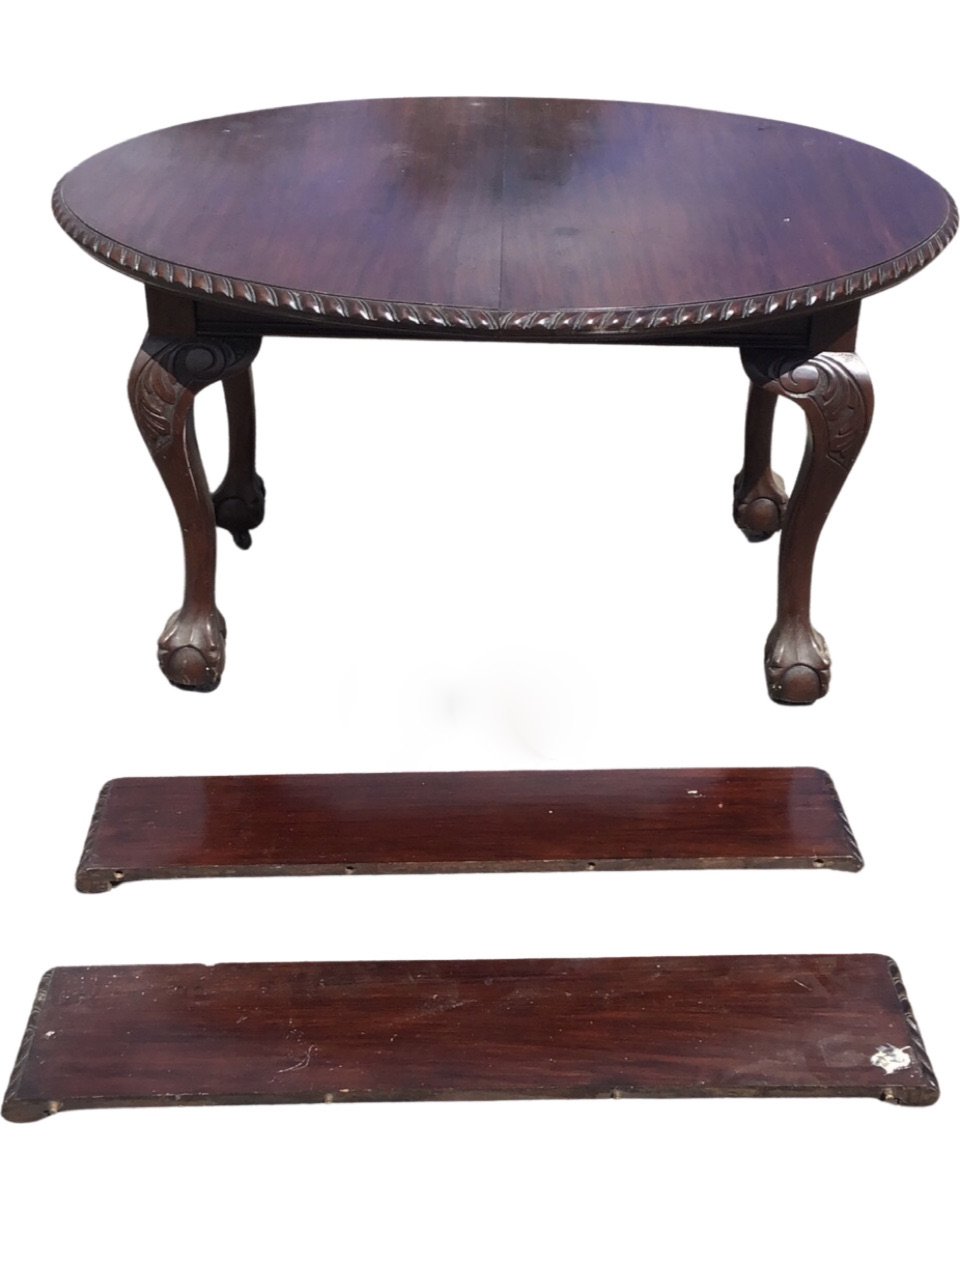 A late Victorian mahogany extending dining table with two leaves, the oval top with gadrooned edge